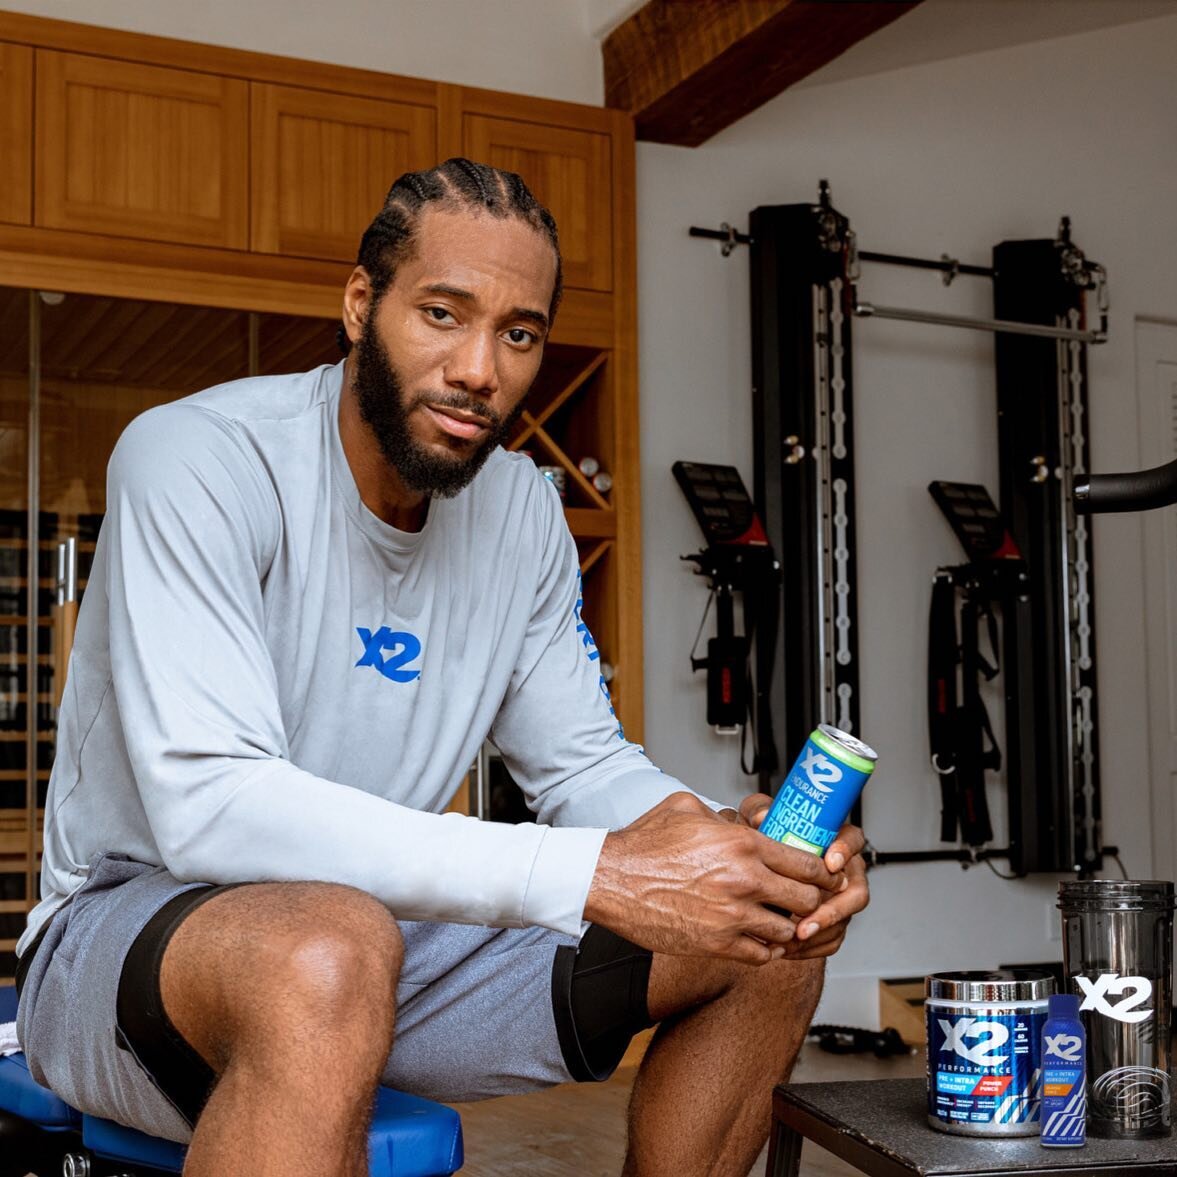 LA Clippers star Kawhi Leonard joins X2 Performance as an investor and member of its board of directors. Leonard&rsquo;s investment came as part of a Series D funding round that raised roughly $14 million.

X2 Performance &mdash; which makes energy d